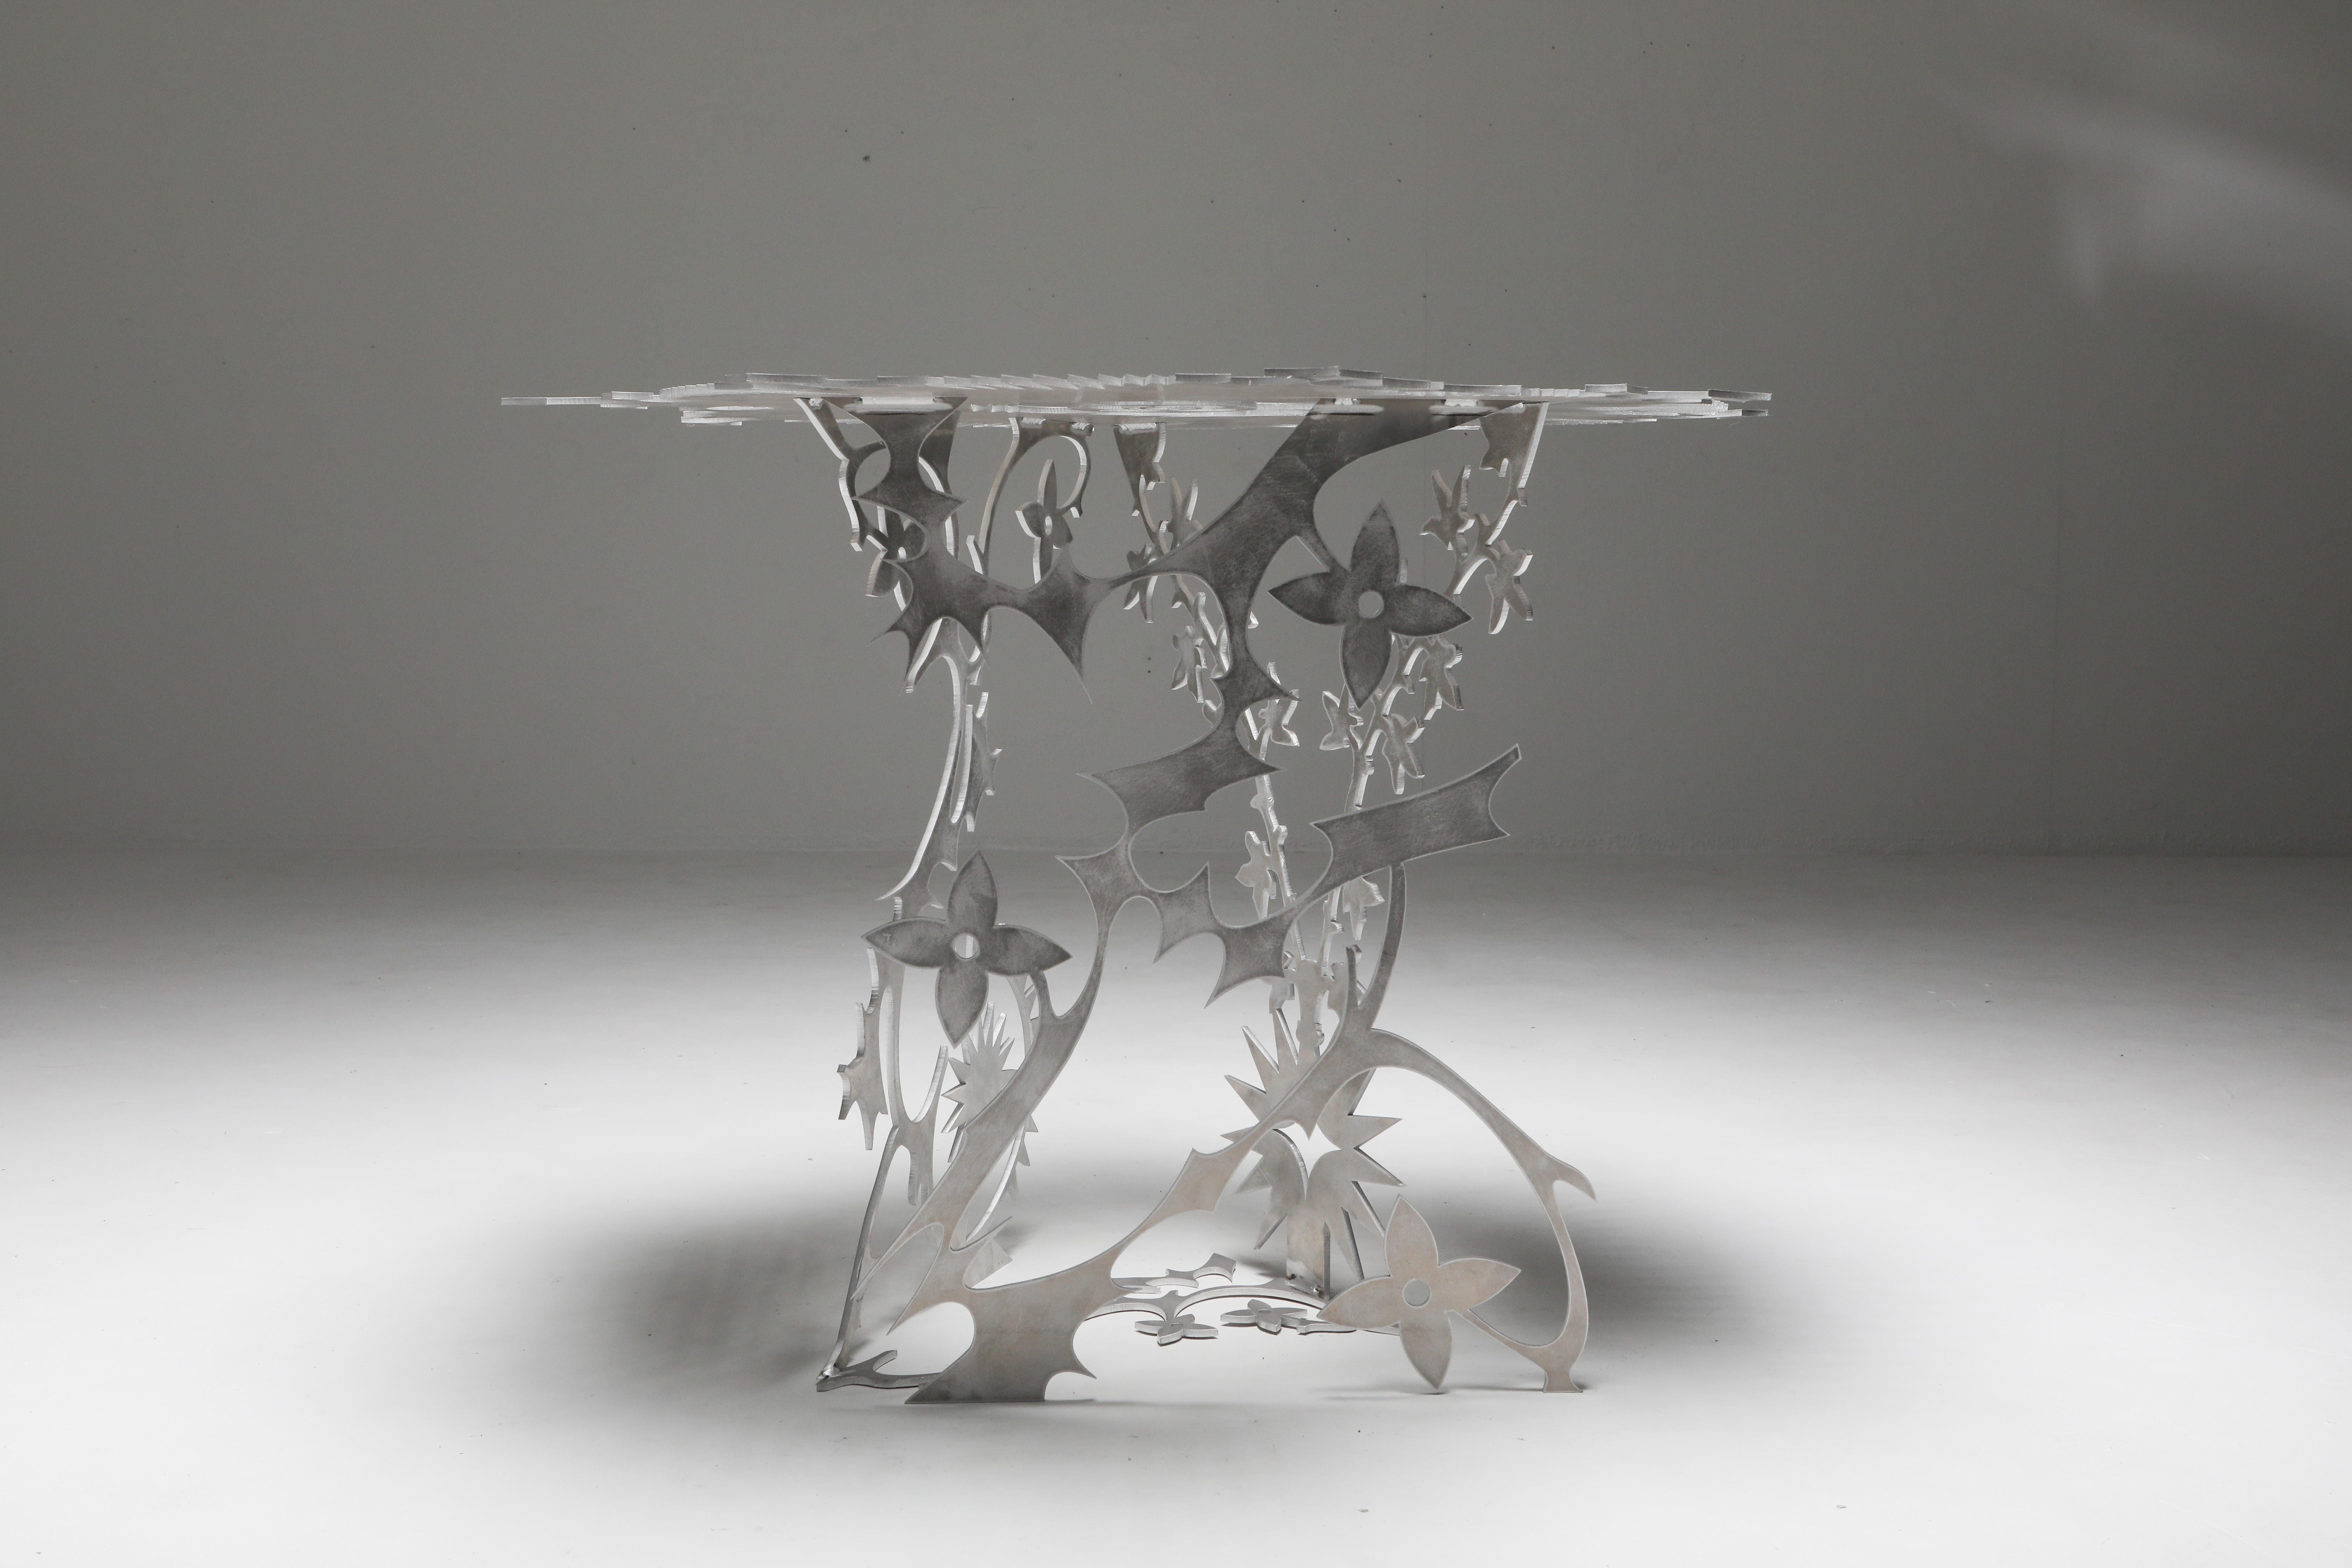 ‘Ornamentum 2’ table made from 6mm lasered aluminium. Designed as part of a collaborative project between spatial designer Orson Van Beek and fashion designer Quinten Mestdagh, consisting of three unique functional art pieces.

Orson Van Beek and